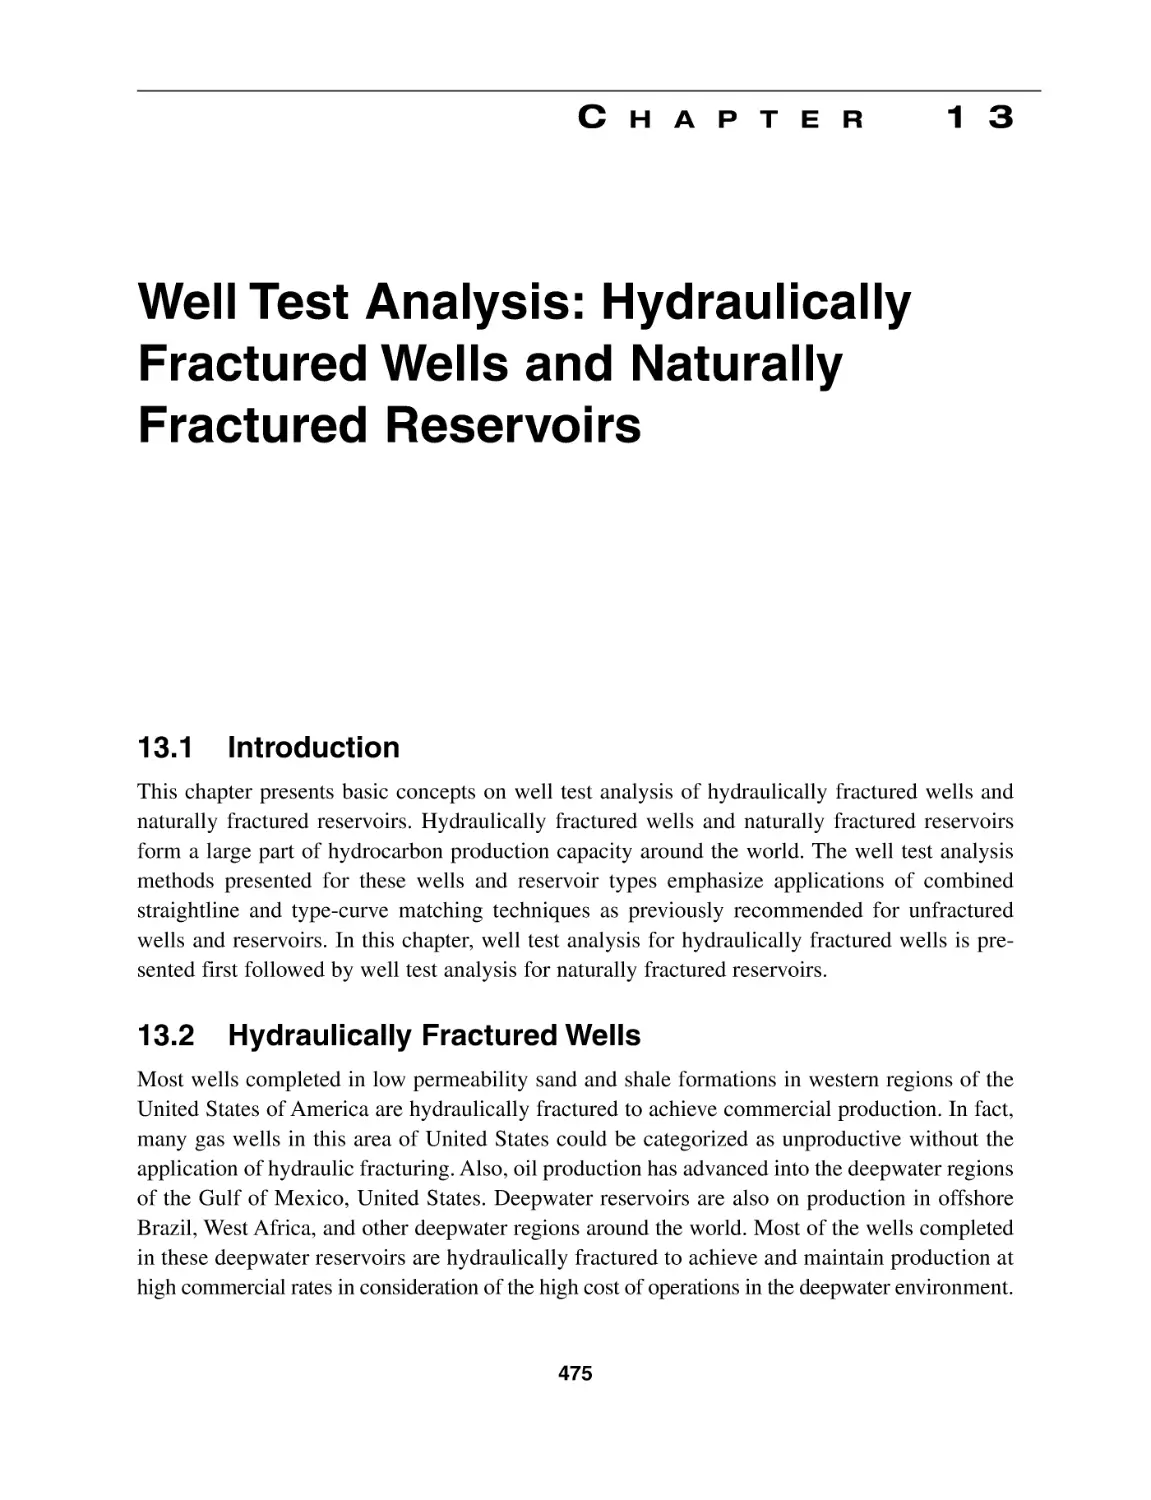 Chapter 13 Well Test Analysis
13.1 Introduction
13.2 Hydraulically Fractured Wells